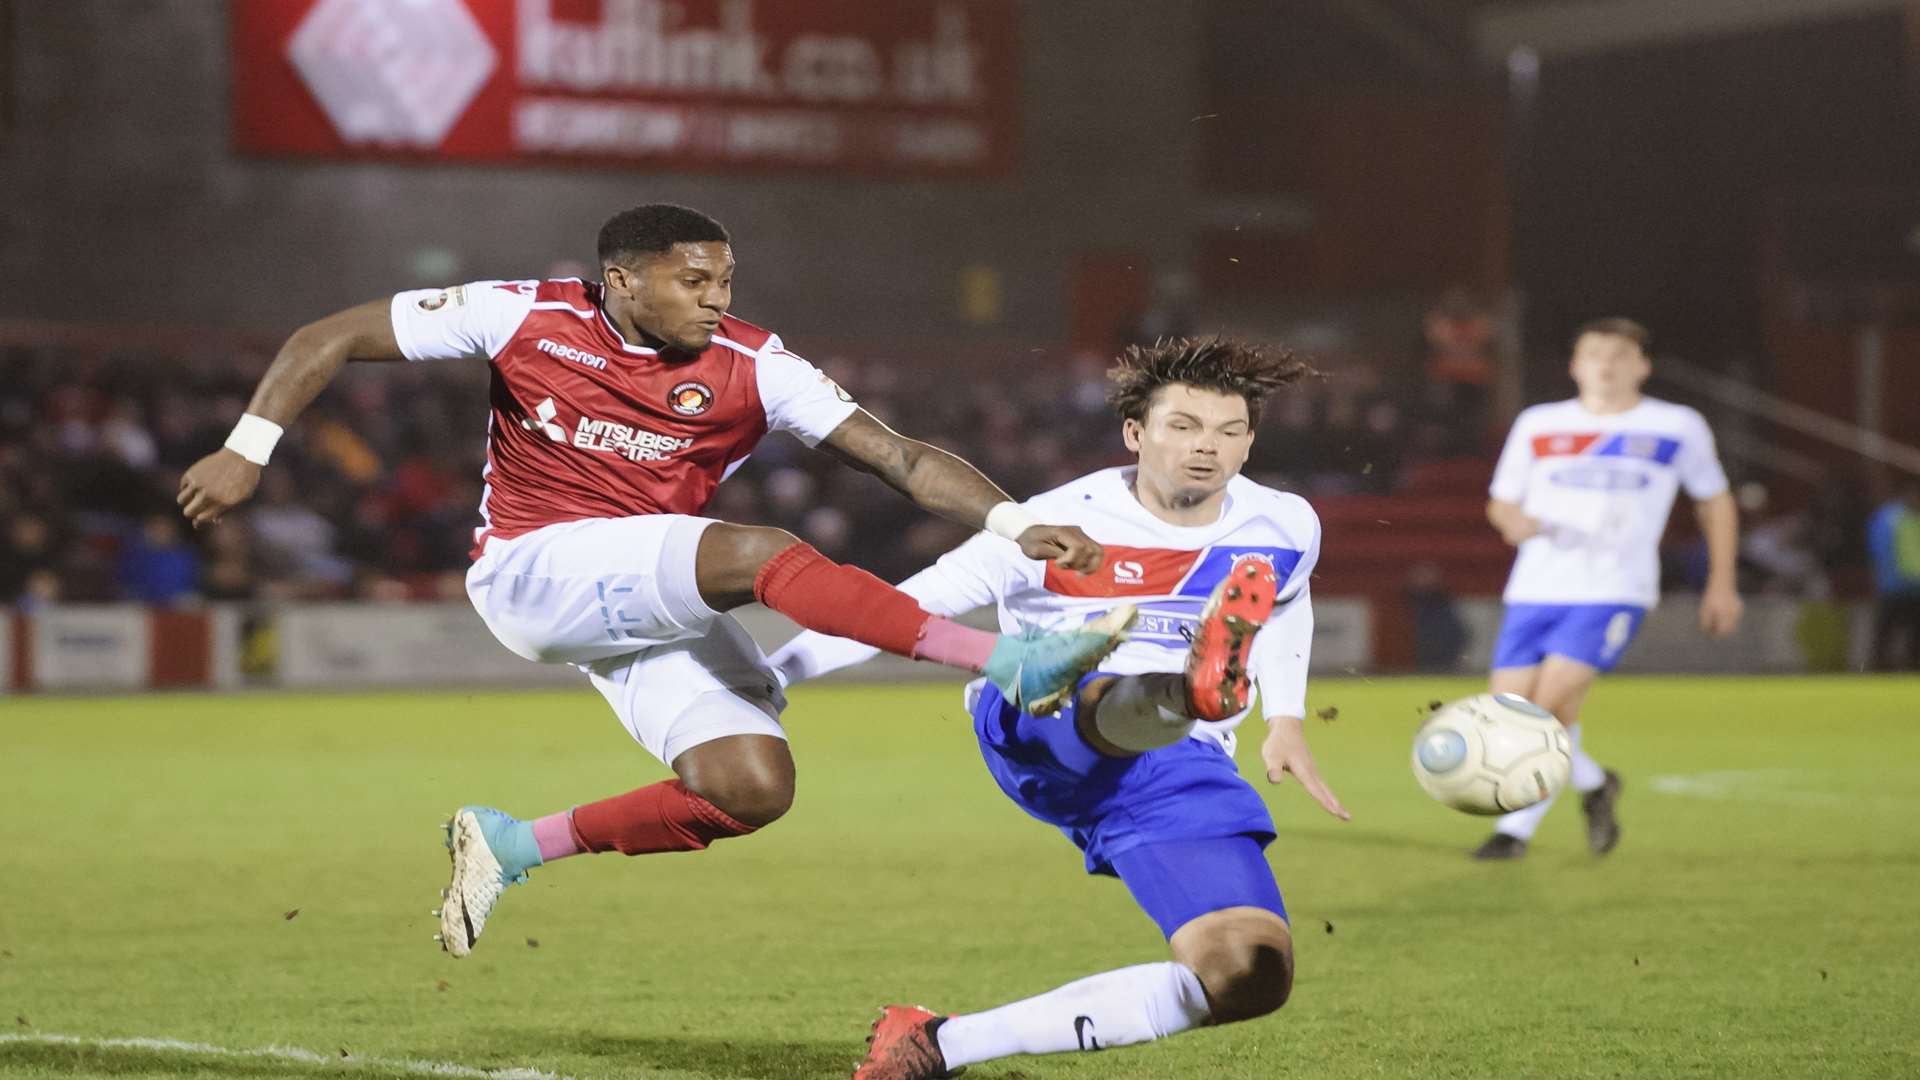 Bradley Bubb stretches for the ball against Dagenham Picture: Andy Payton